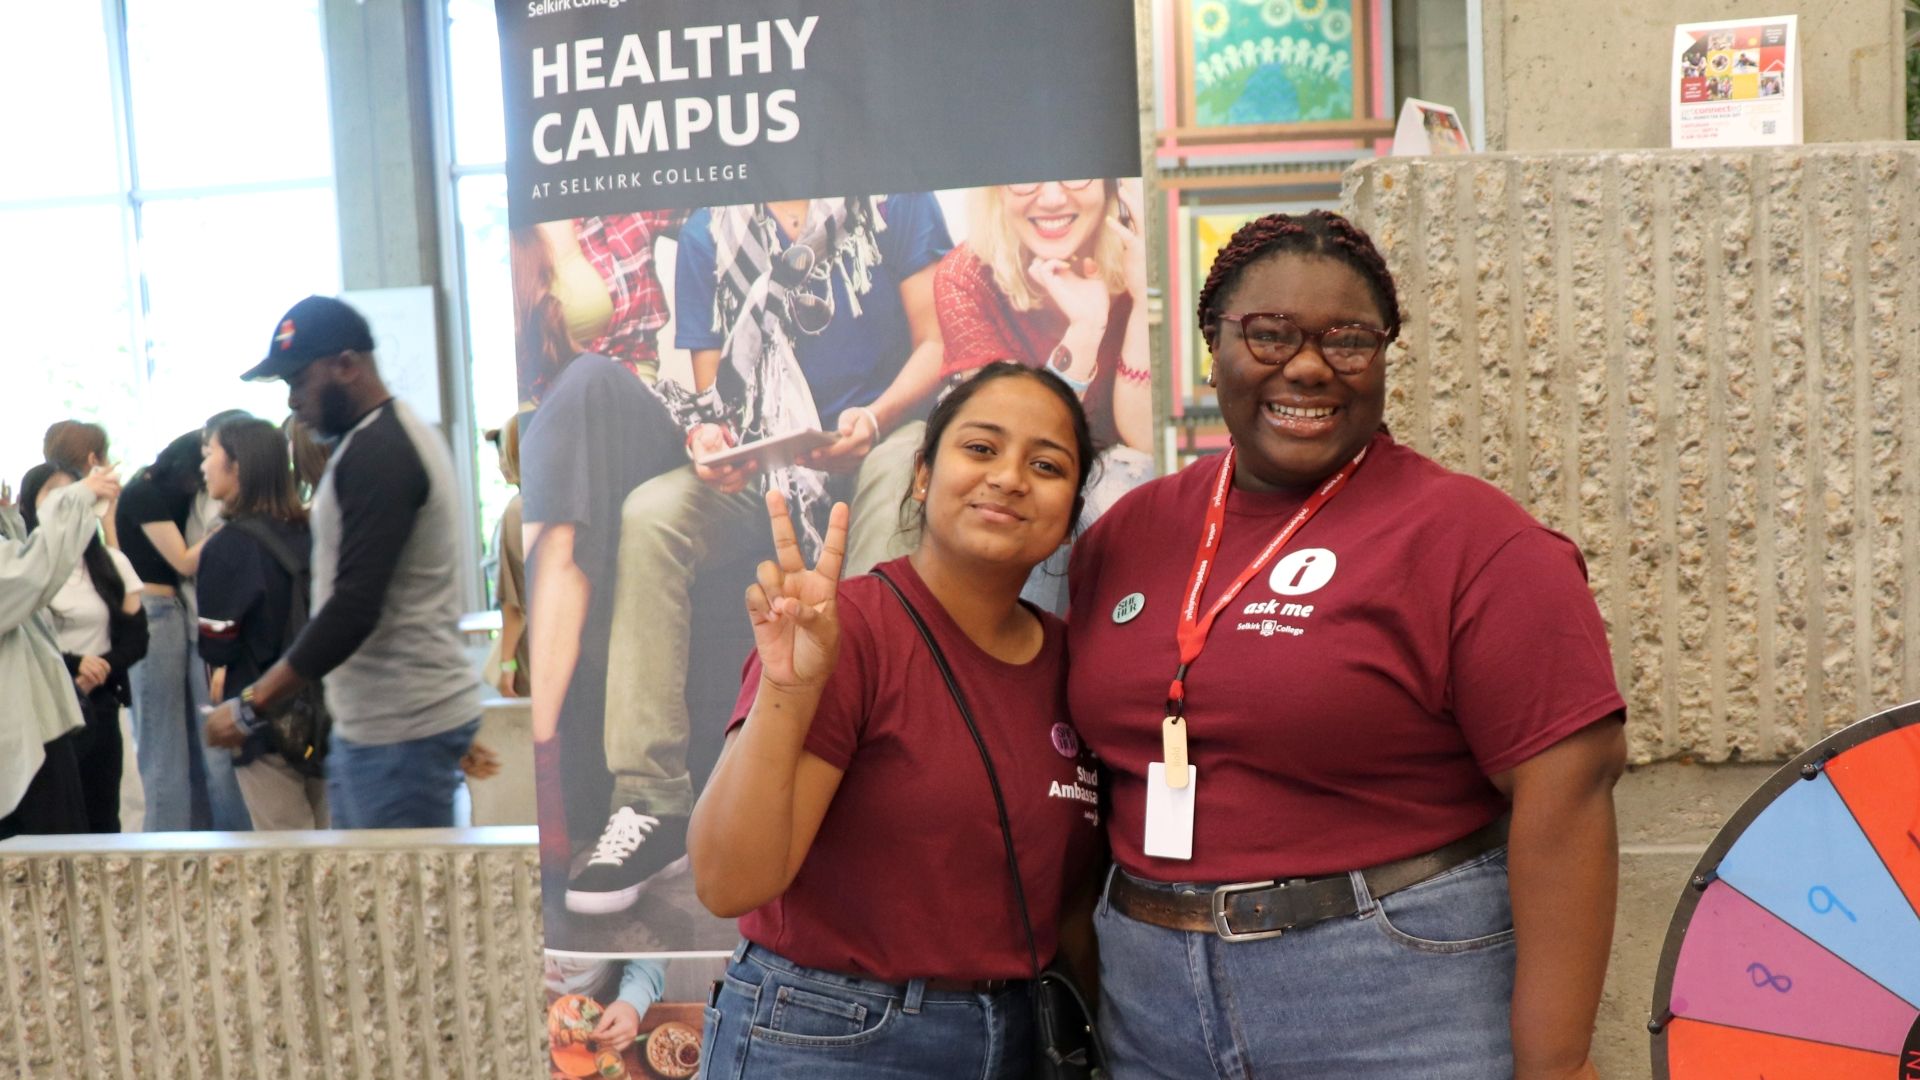 Student Ambassadors at Get Connected talking about Healthy Campus